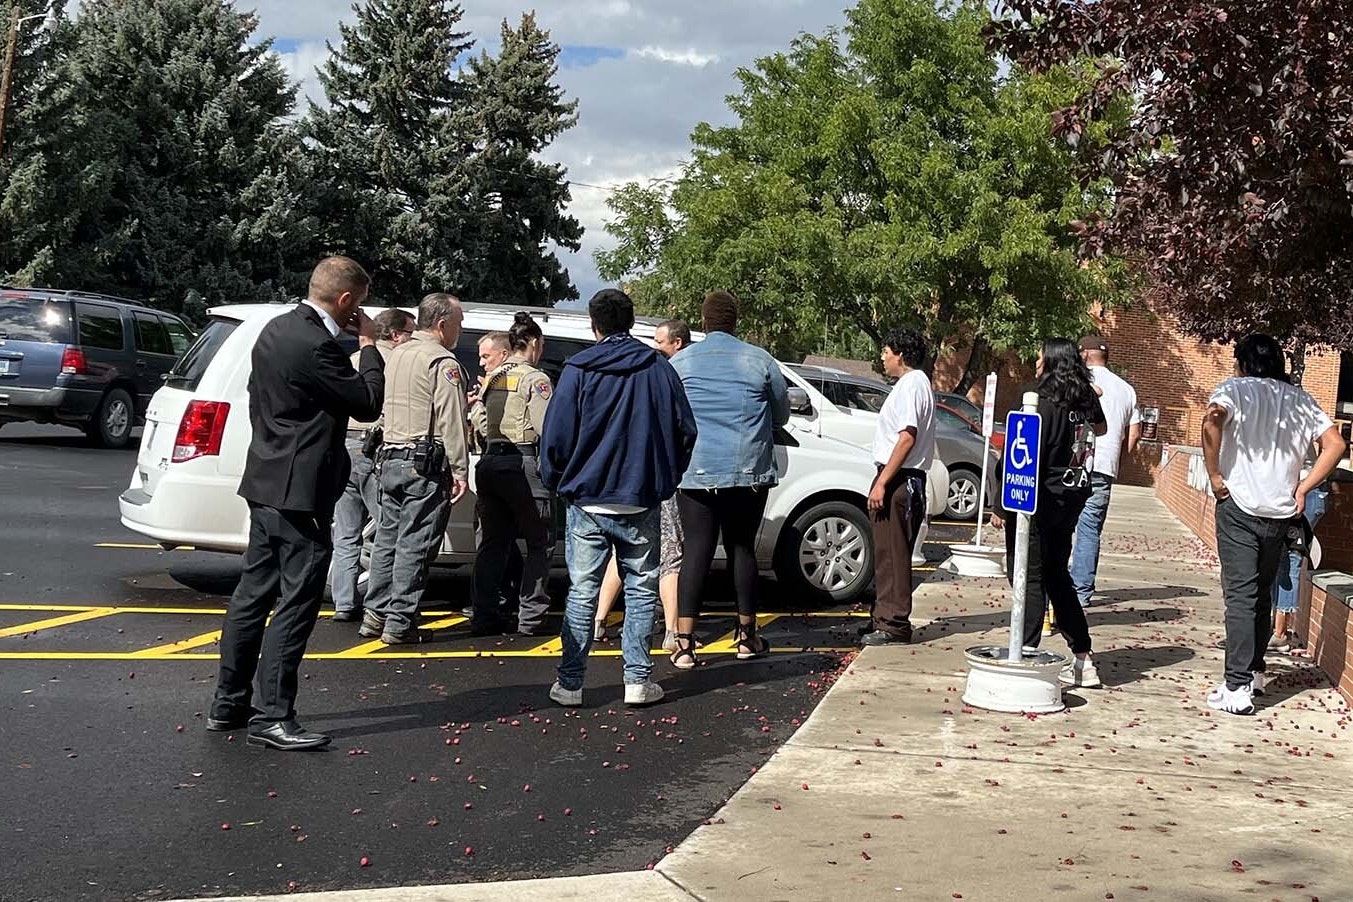 Outside the Fremont County Courthouse on Thursday after Brandon Monroe, 20, was sentenced to two life terms in prison for killing a Riverton couple in 2019. His family stands stunned around a sheriff's office transport van waiting to take him.